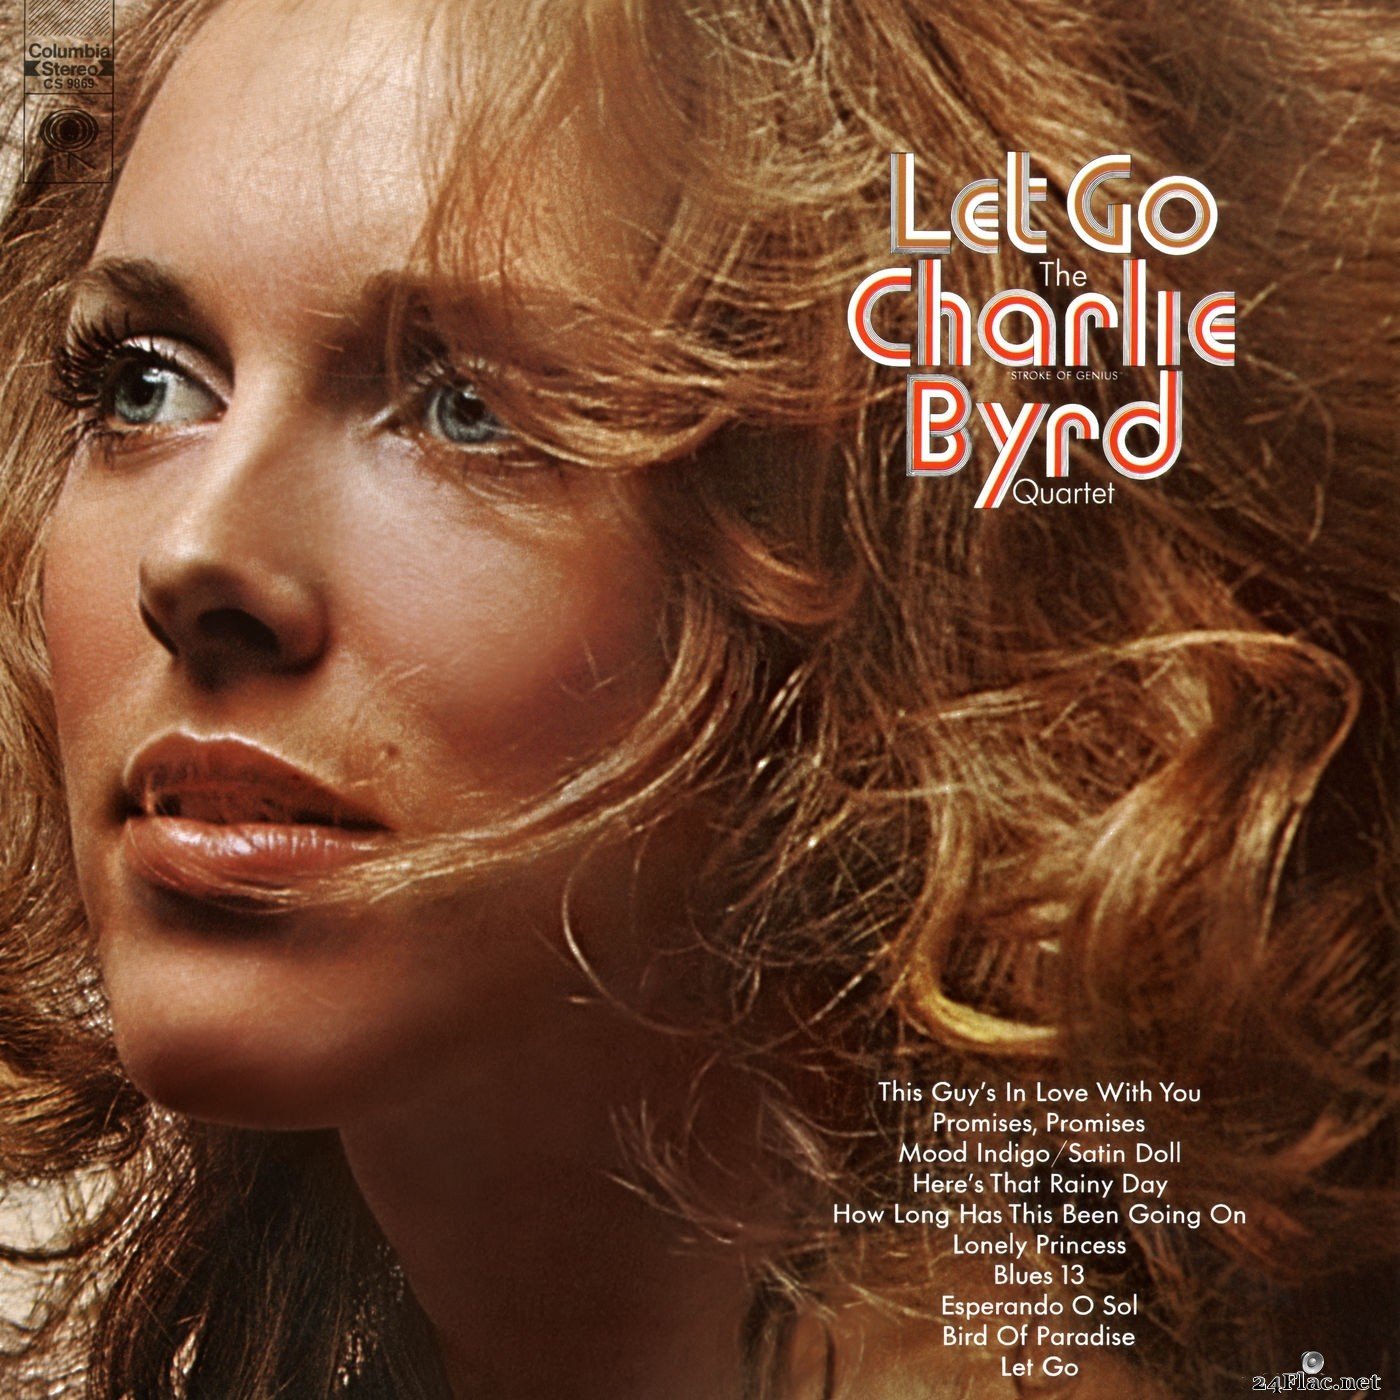 The Charlie Byrd Quartet - Let Go (Live at the Hong Kong Bar, Century Plaza Hotel in Los Angeles, February 27 and 28, 1969) (2019) Hi-Res